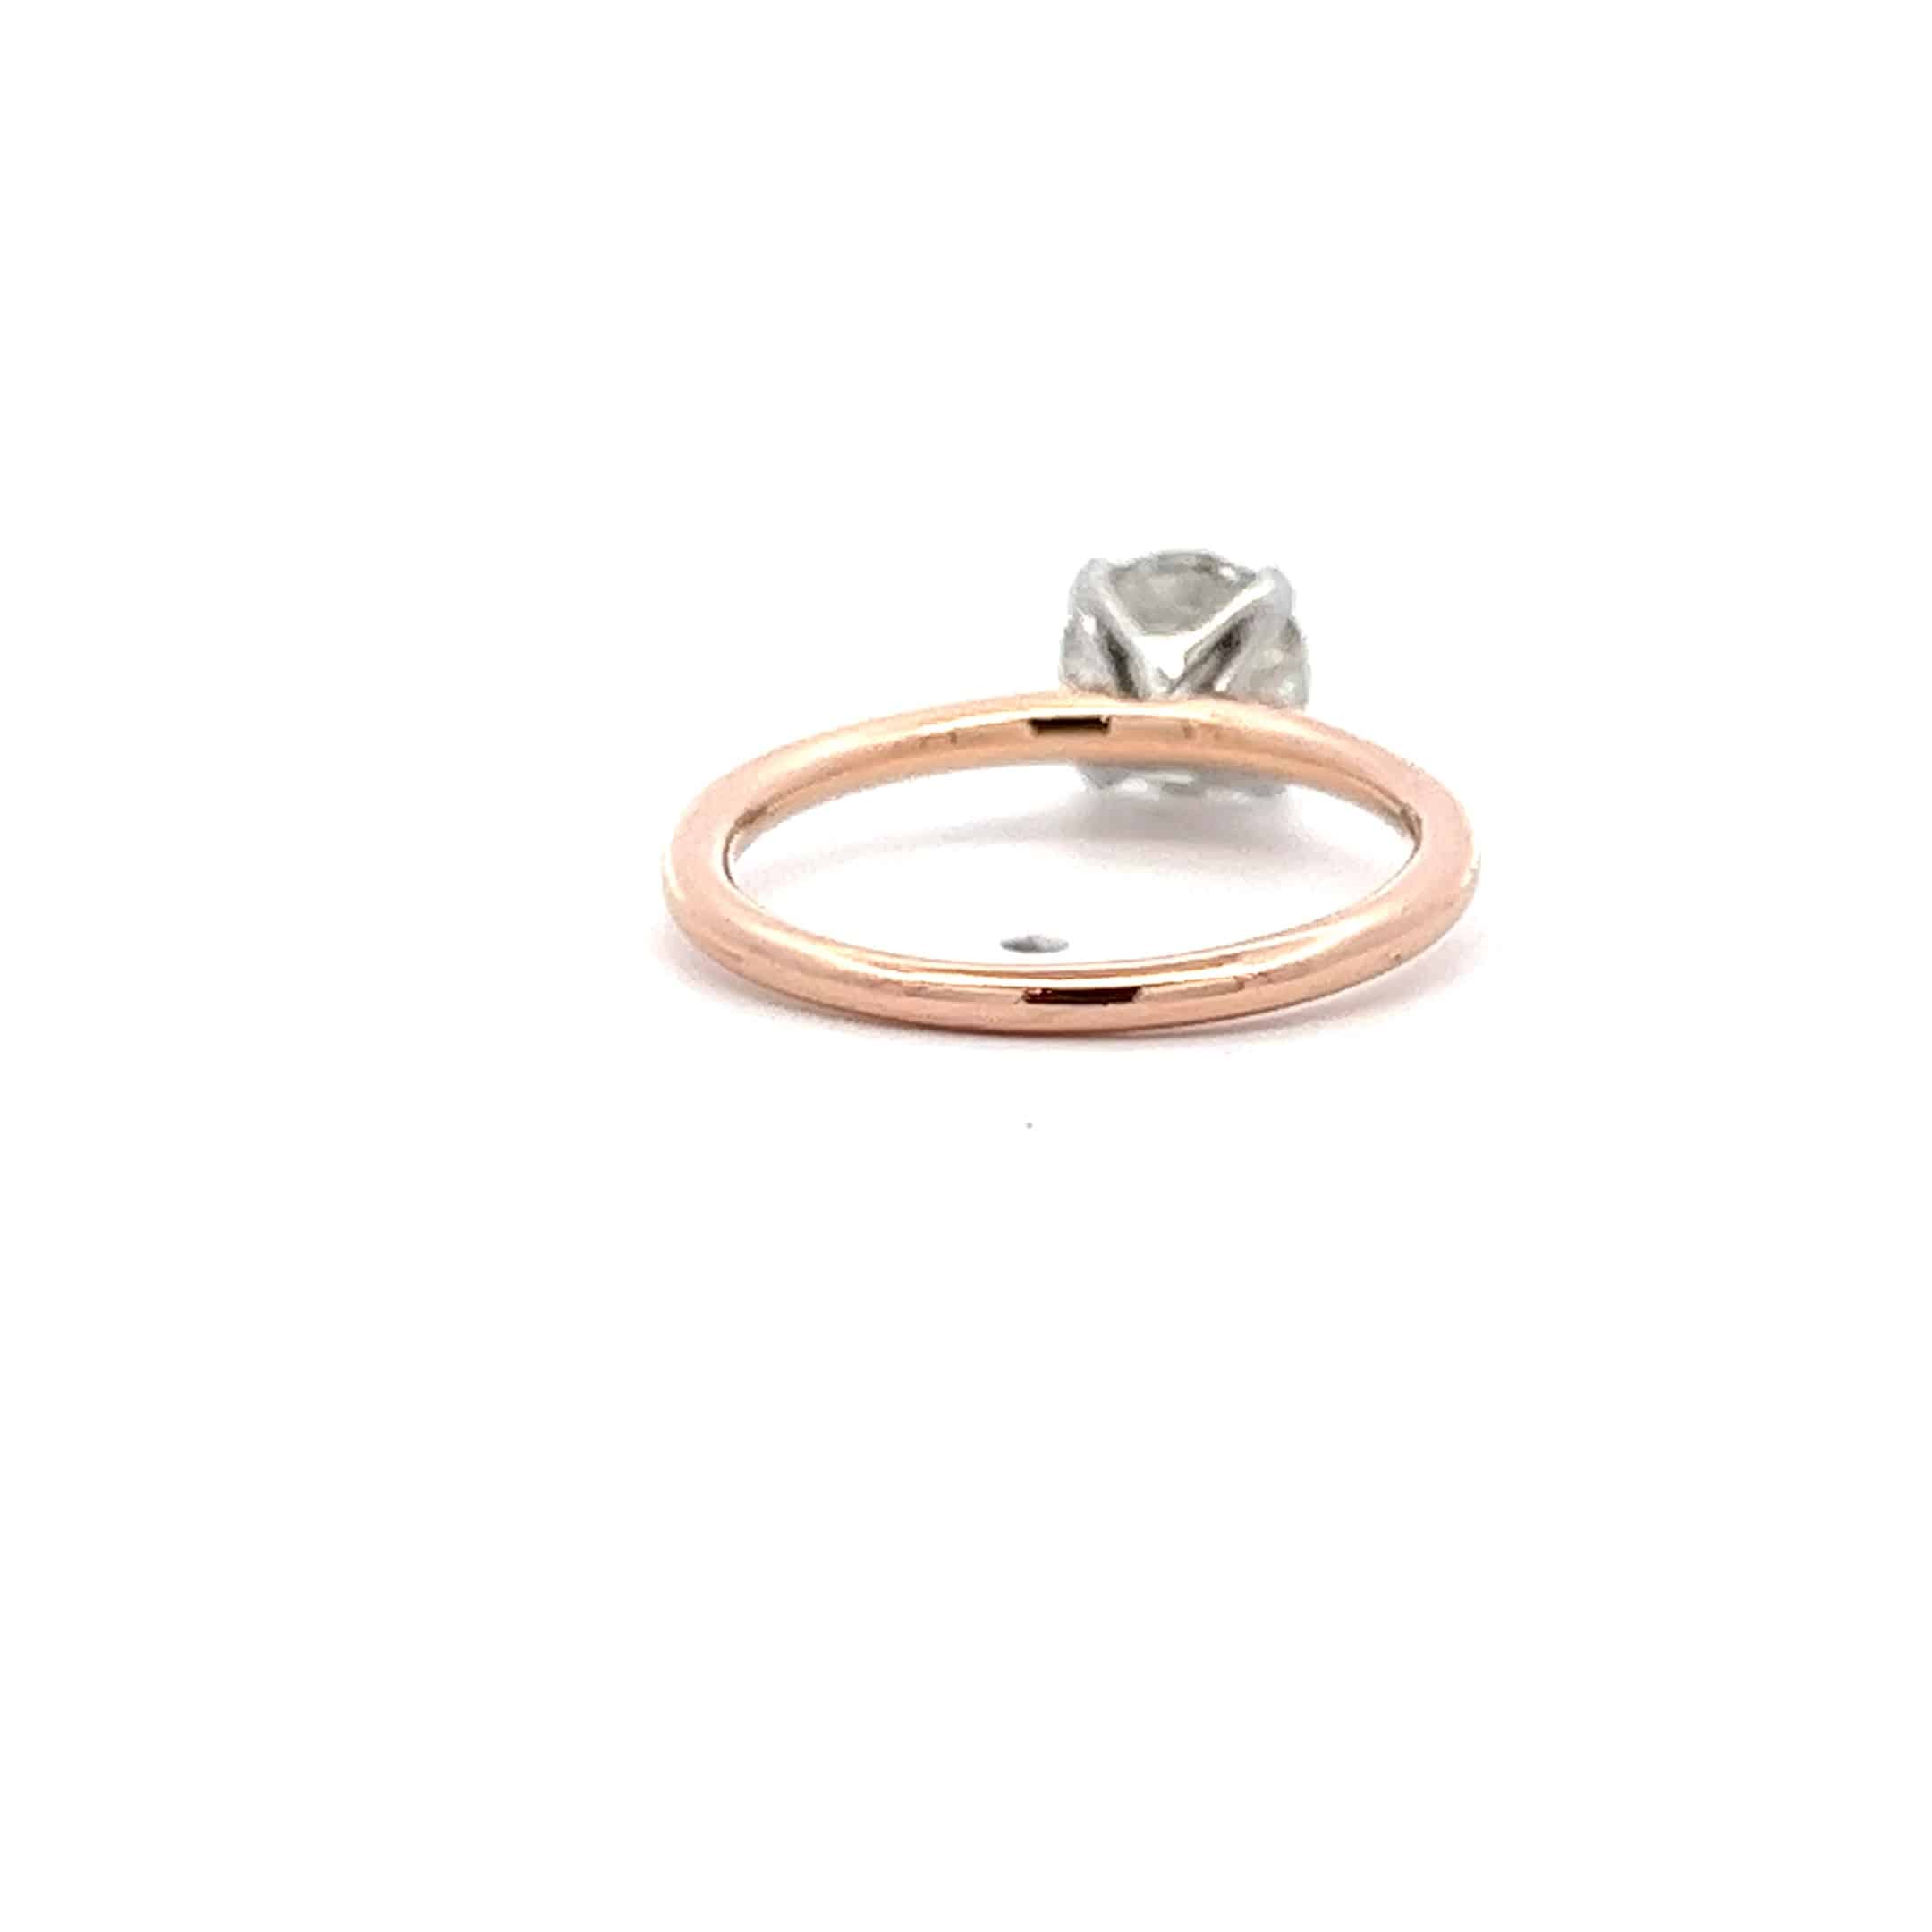 1.00ct Brilliant Cut Diamond Solitaire Ring in 18ct Rose Gold and Platinum – GIA Certificated